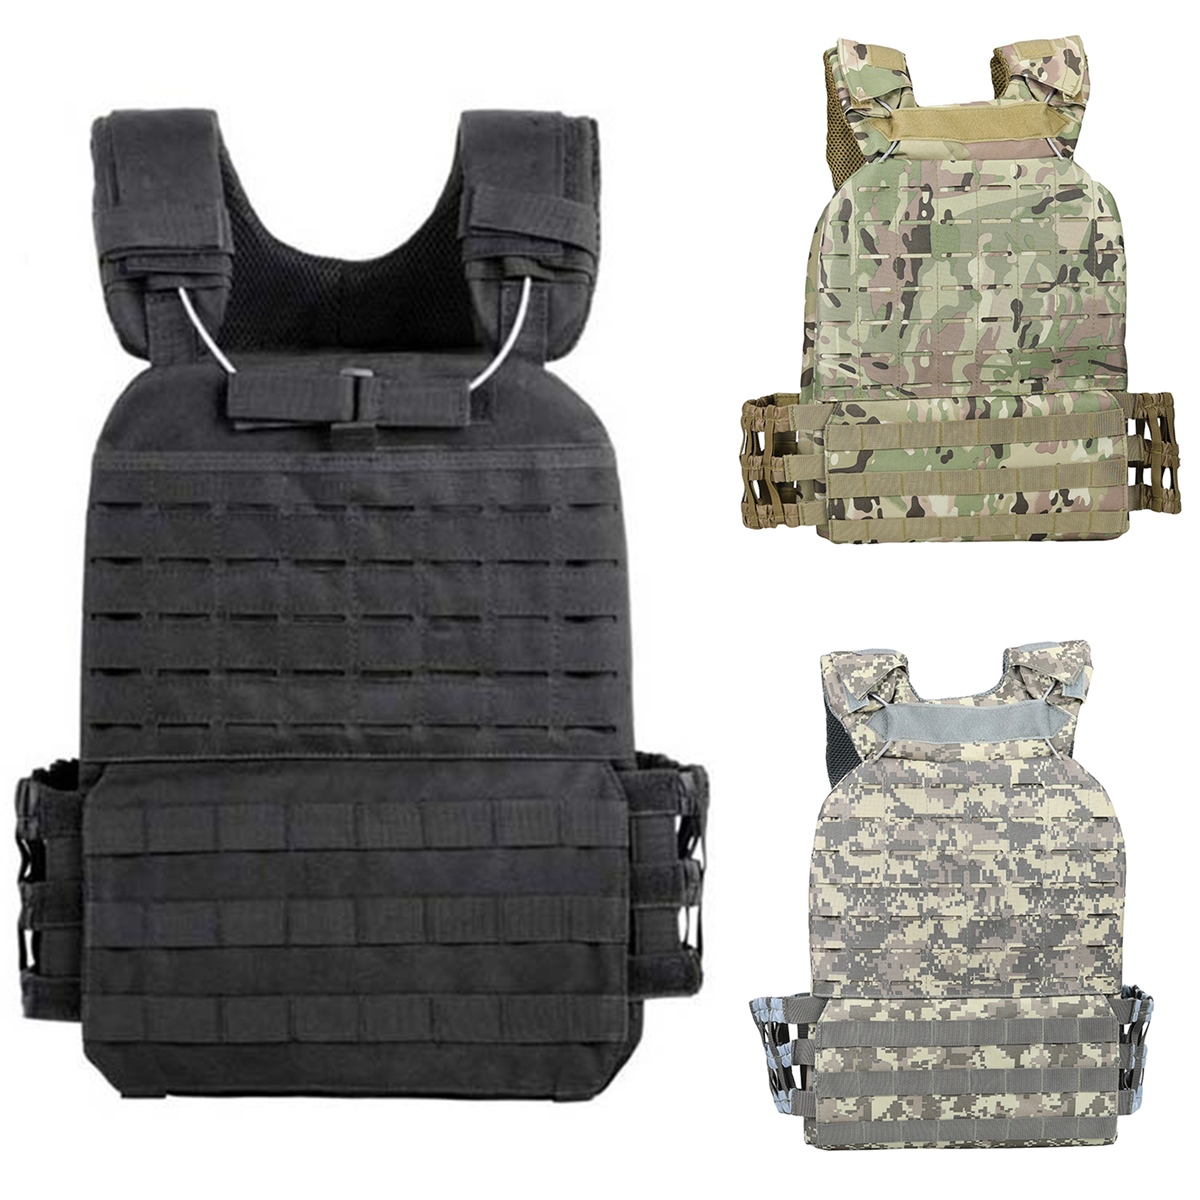 Outdoor-Adult-Tactical-TMC-Molle-Vest--Physical-Training-Sports-Fitness-Oxford-Weight-Waistcoat-1471093-2